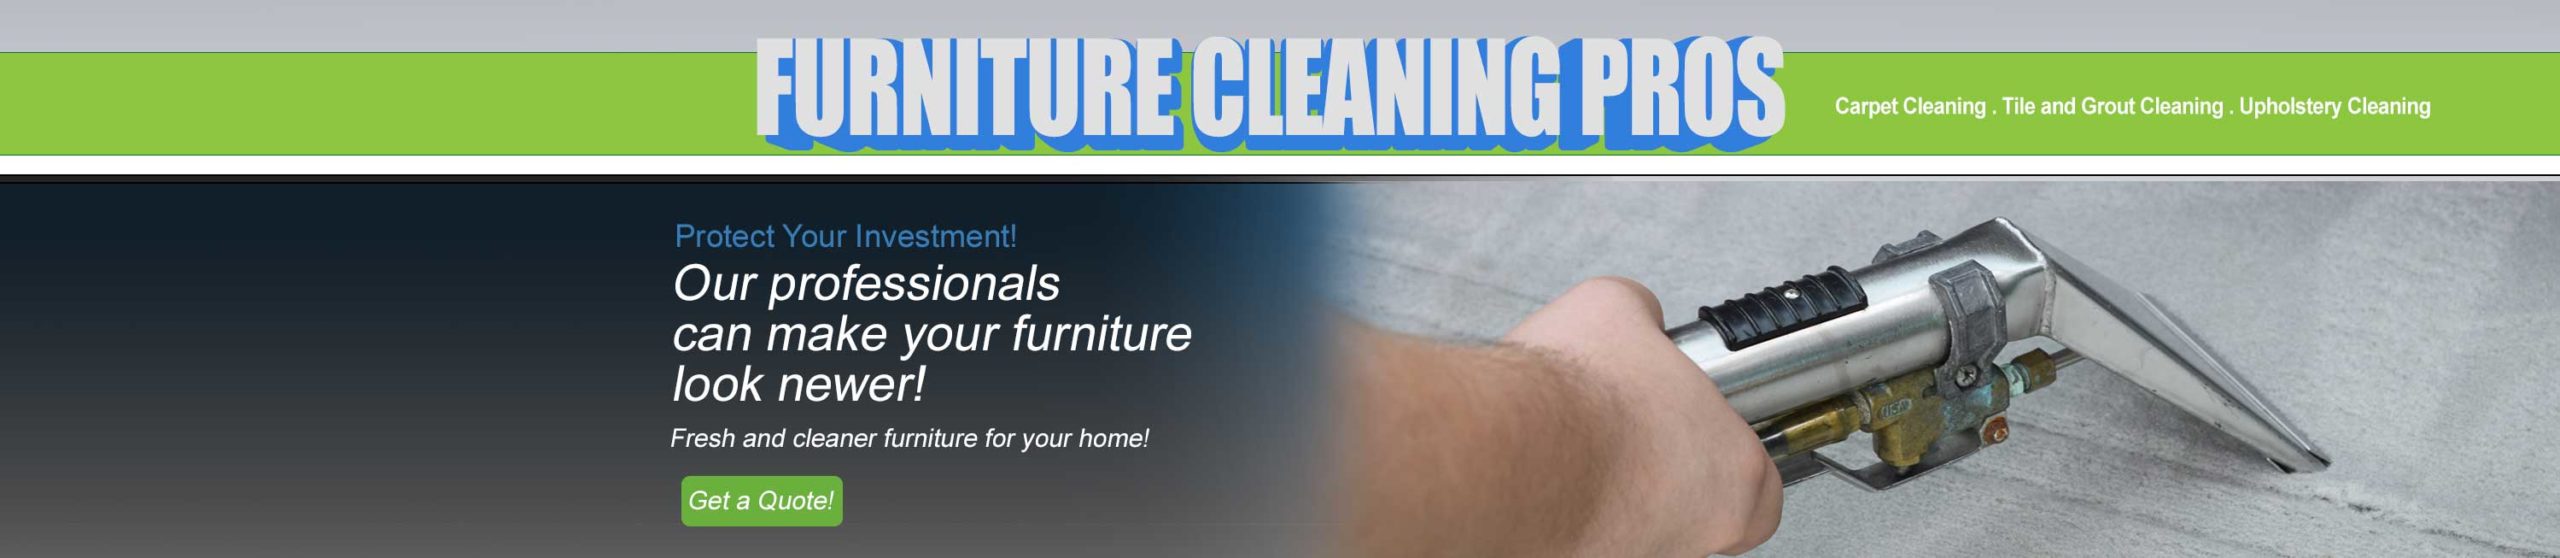 Furniture and upholstery cleaning in Buckeye AZ